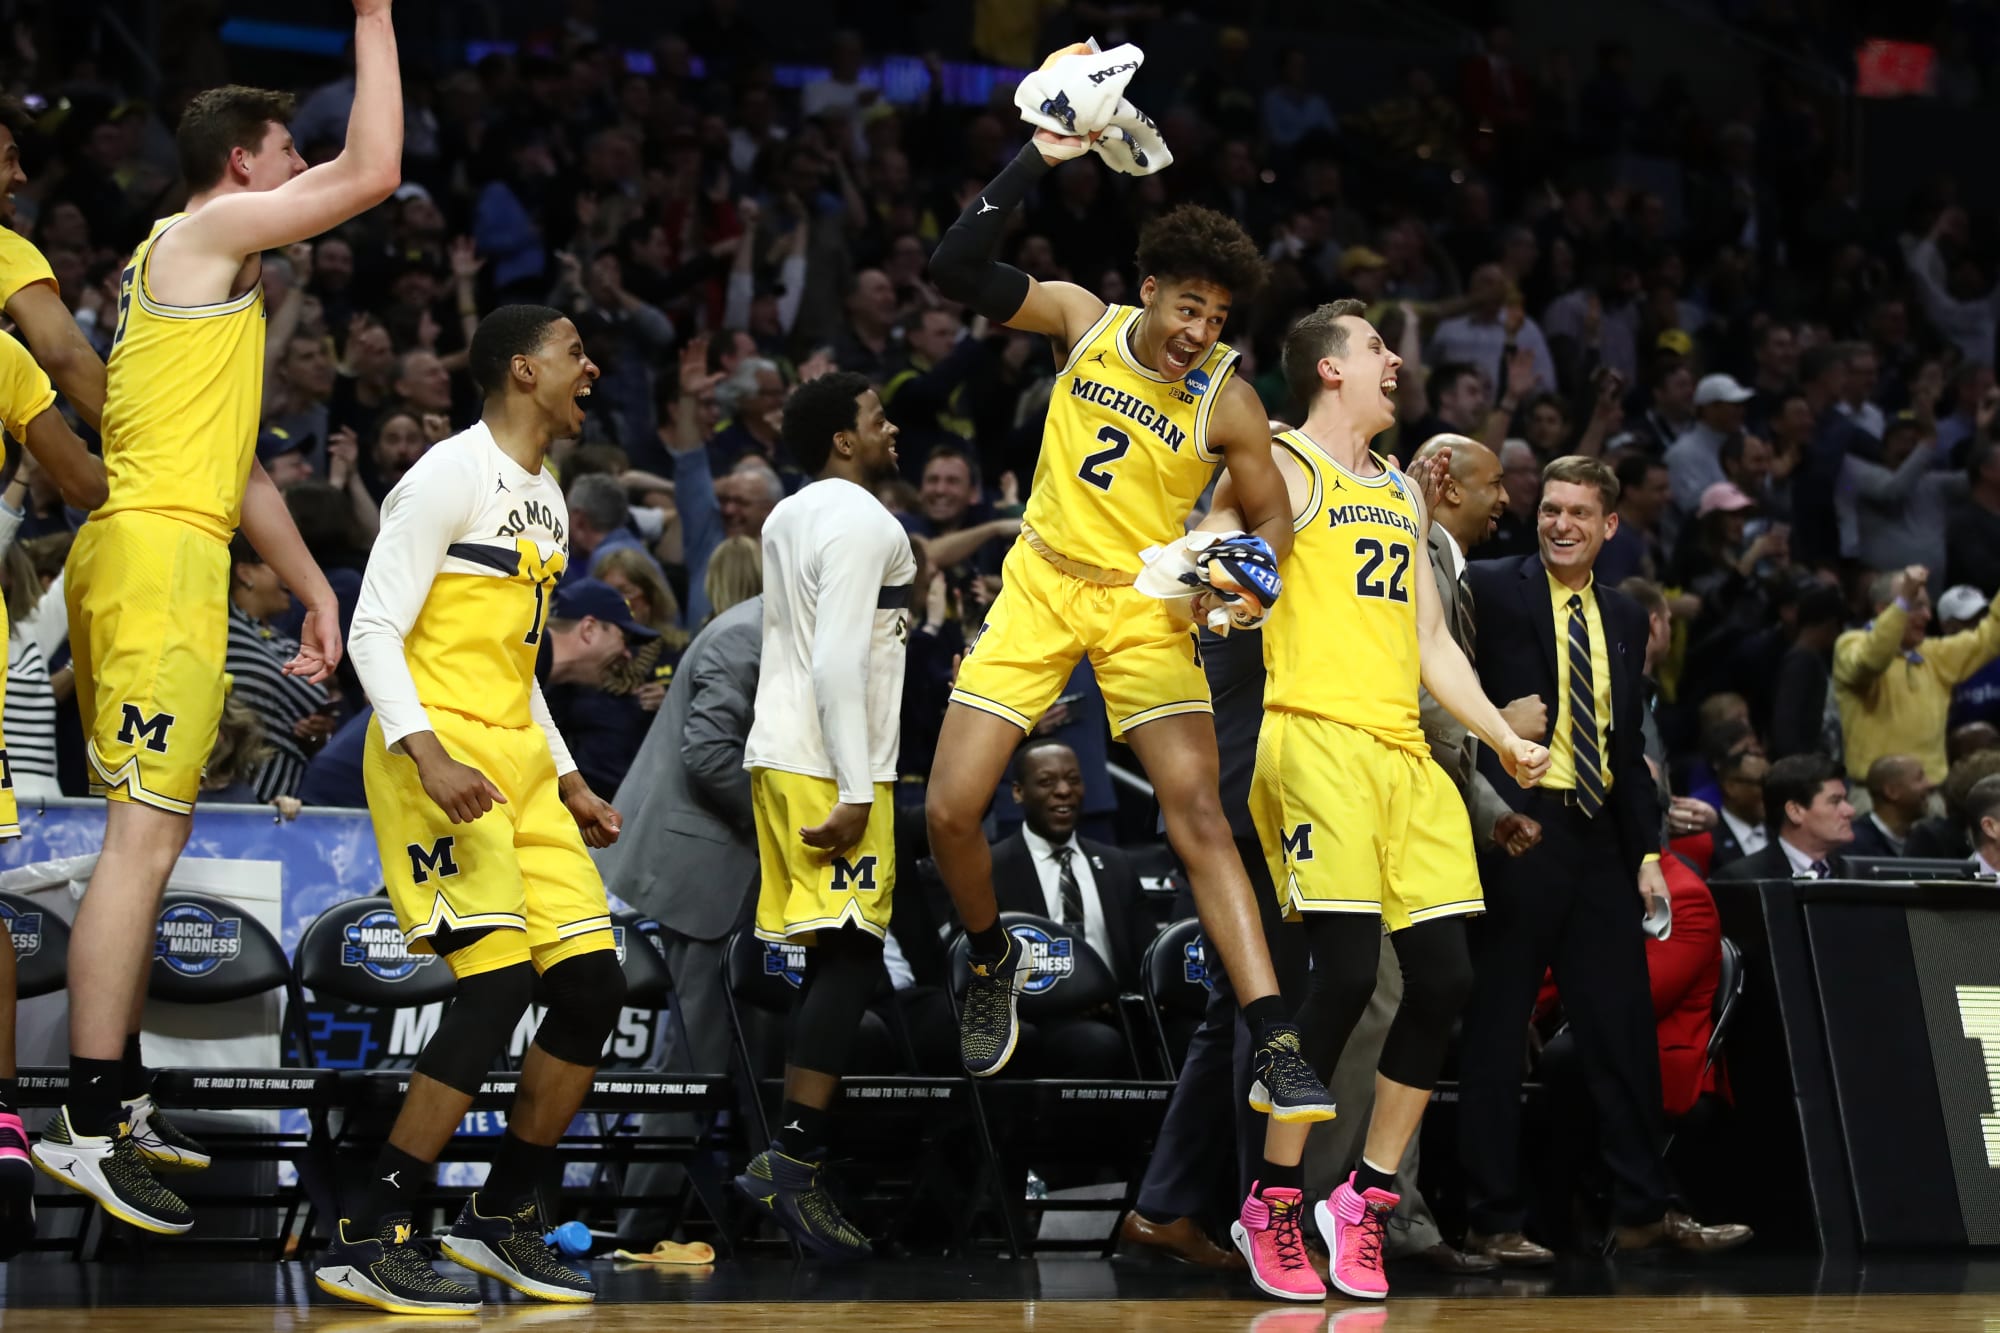 Michigan Basketball is headed to the Final Four